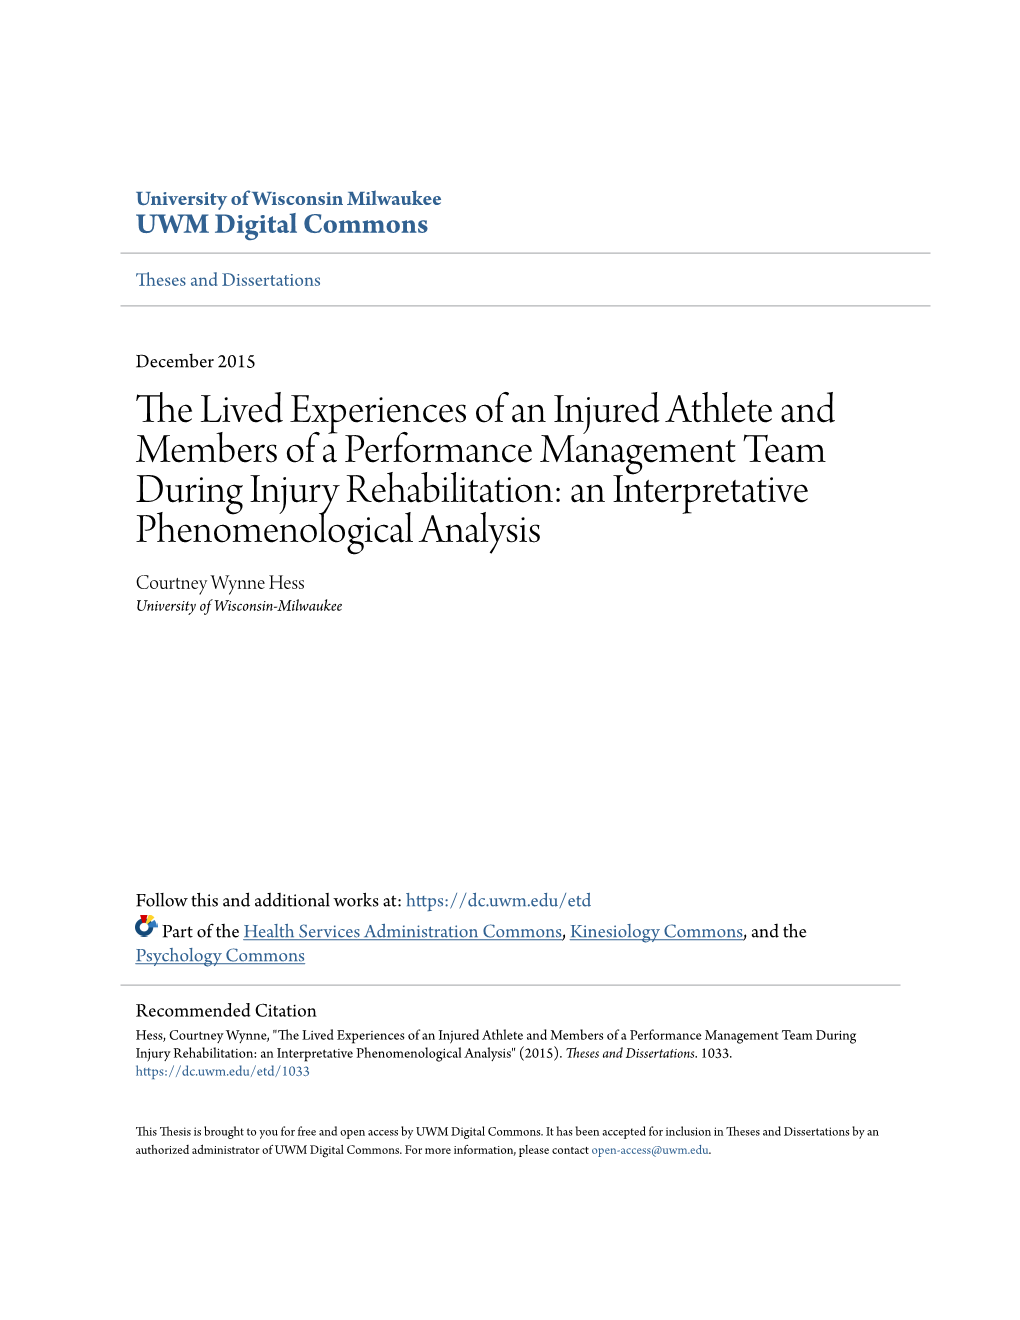 The Lived Experiences of an Injured Athlete and Members of a Performance Management Team During Injury Rehabilitation